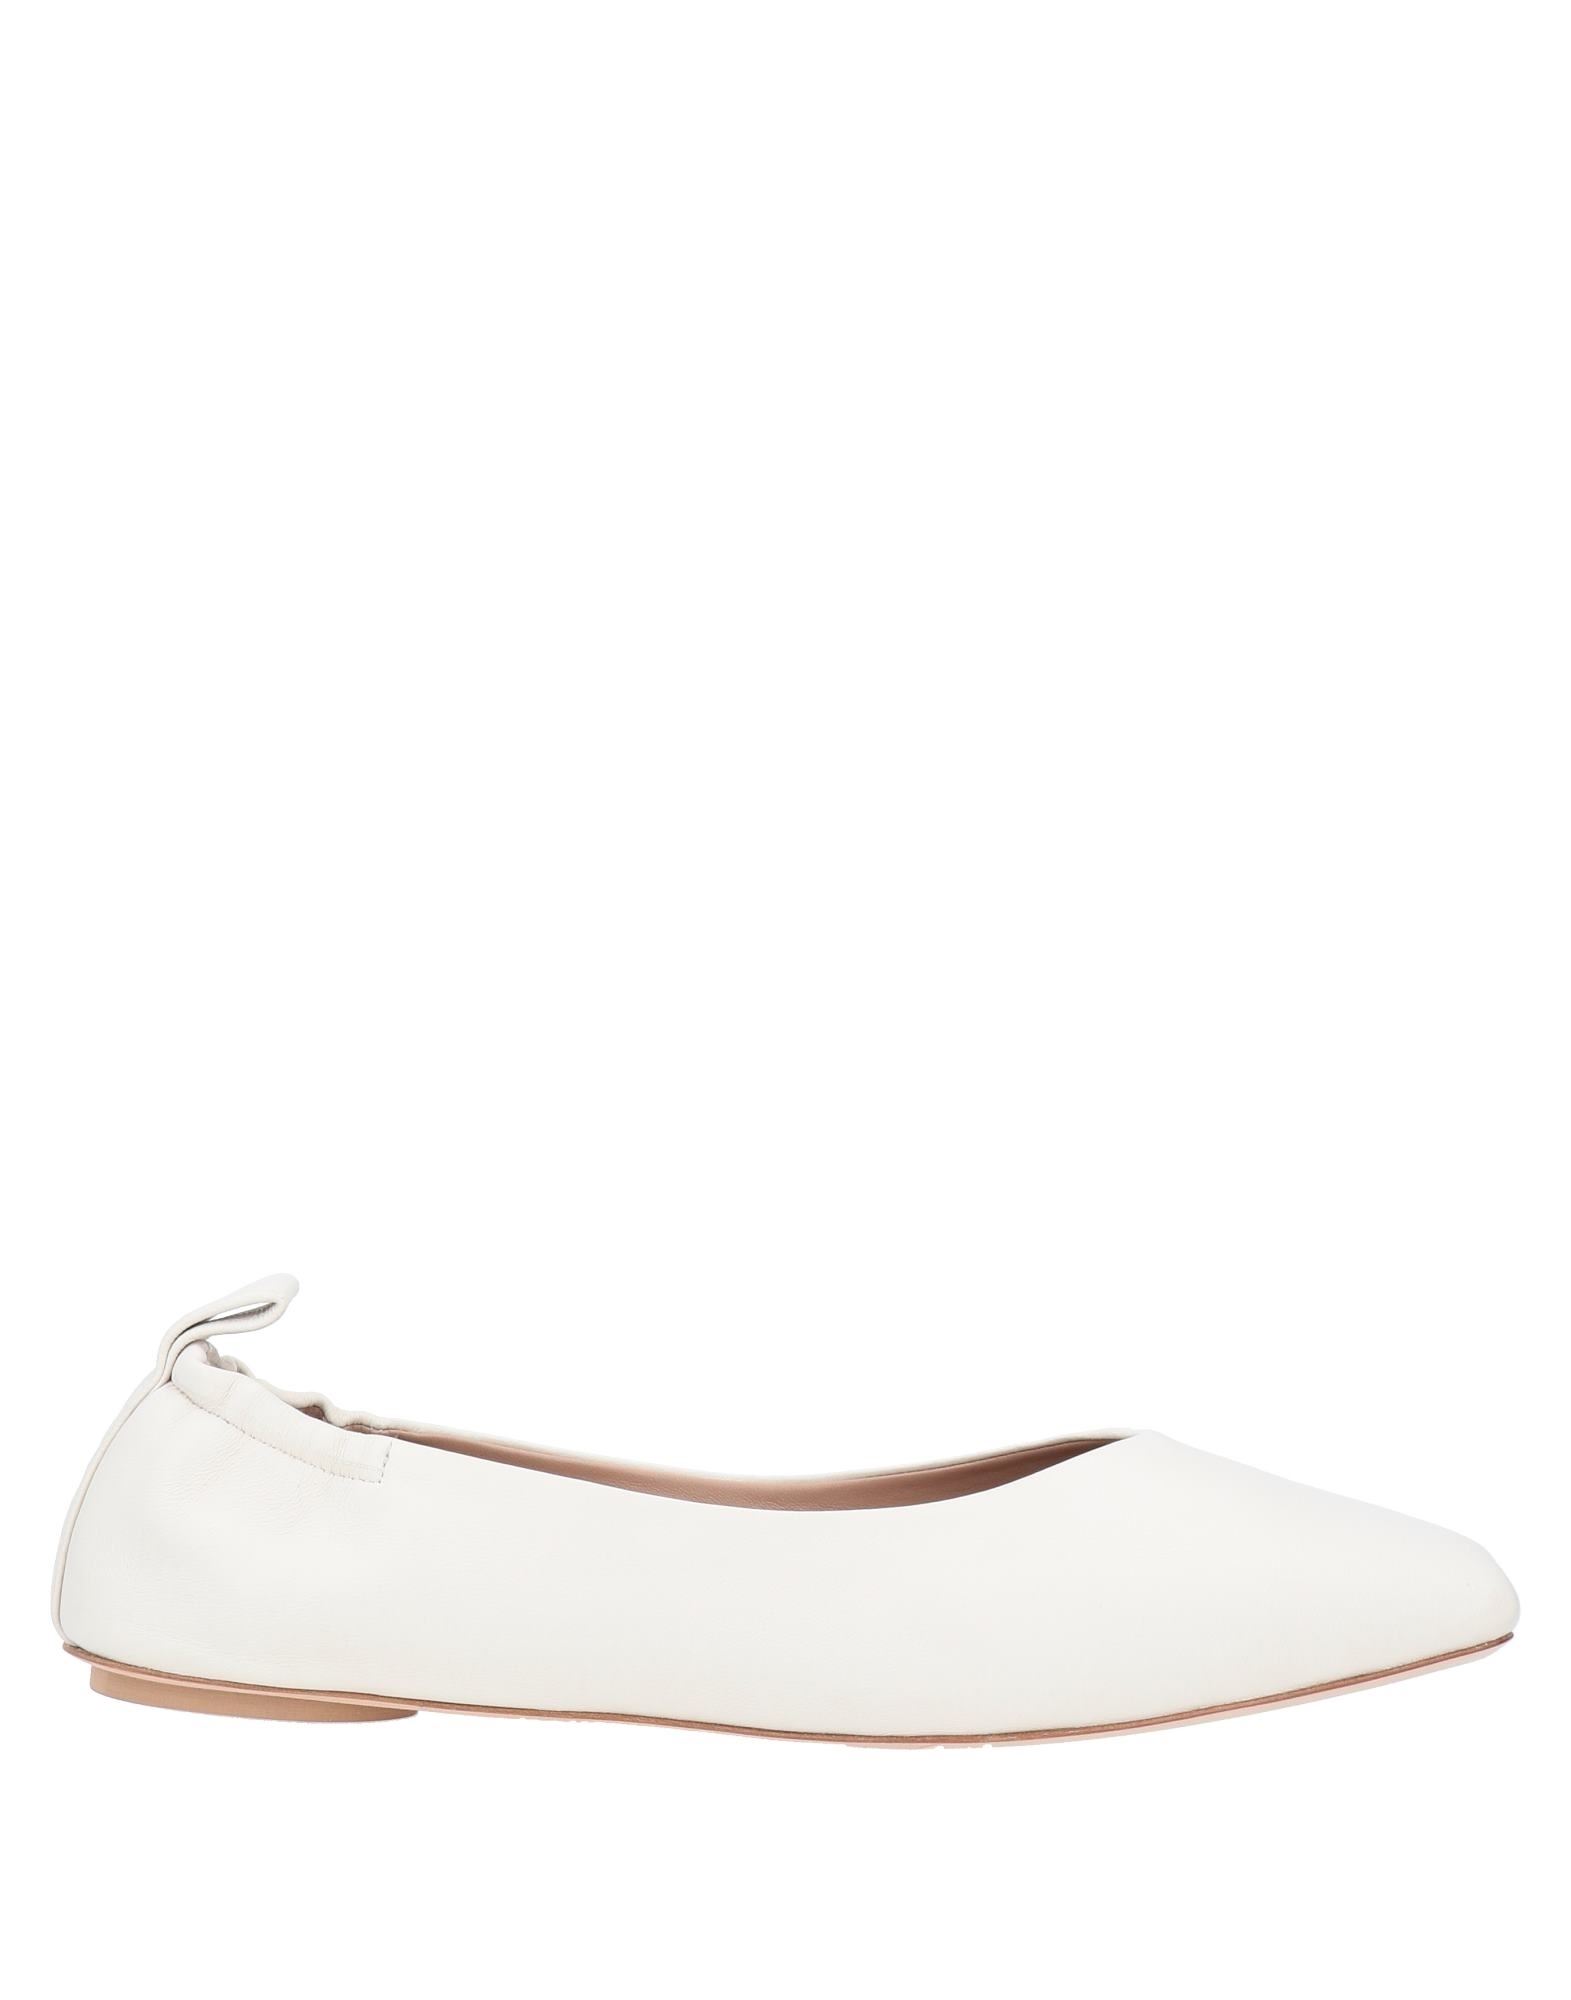 Max & Co Ballet Flats In Ivory